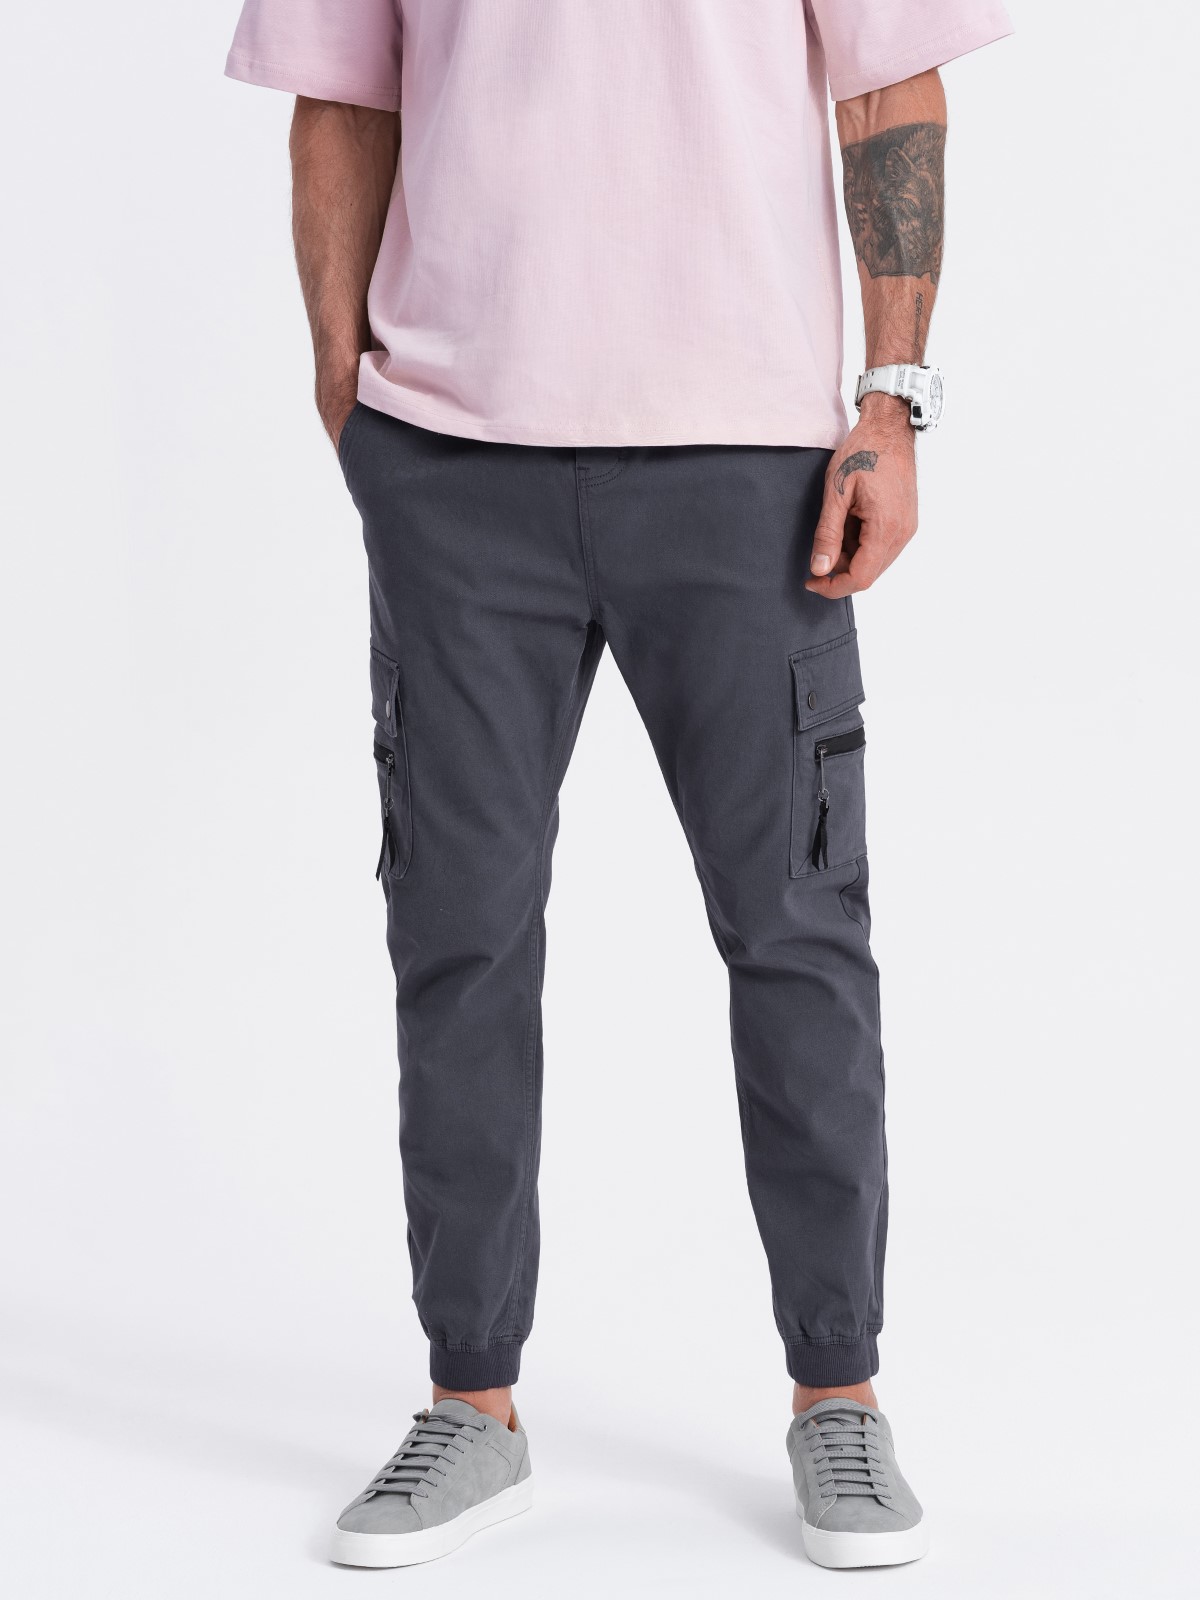 Ombre Men's JOGGER pants with zippered cargo pockets - graphite